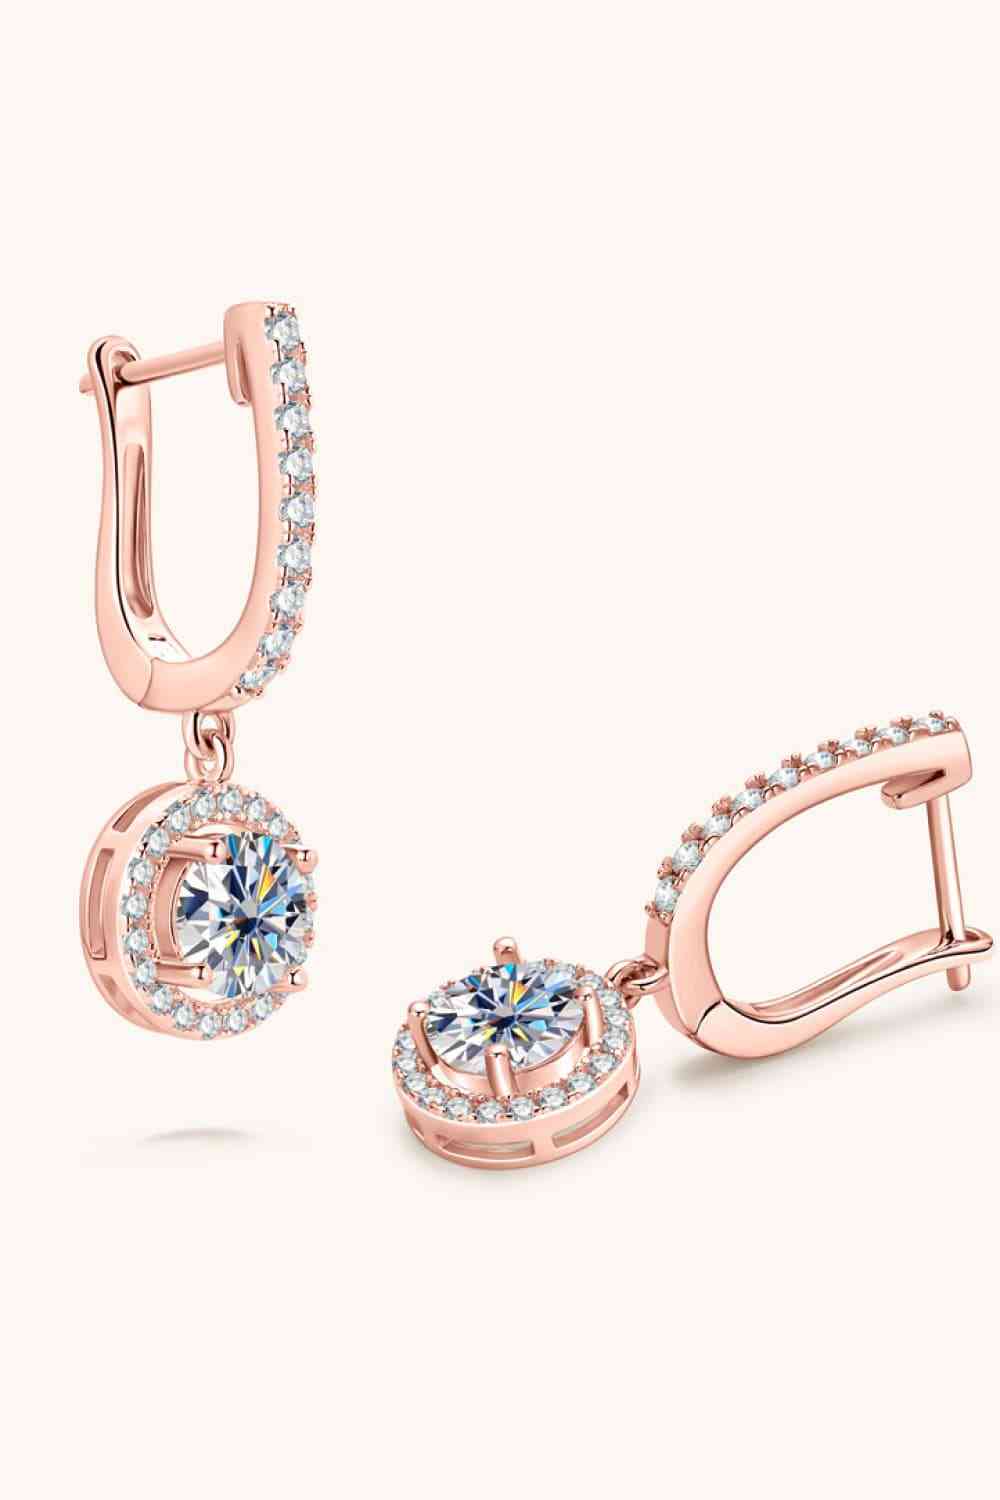 a pair of rose gold earrings with diamonds